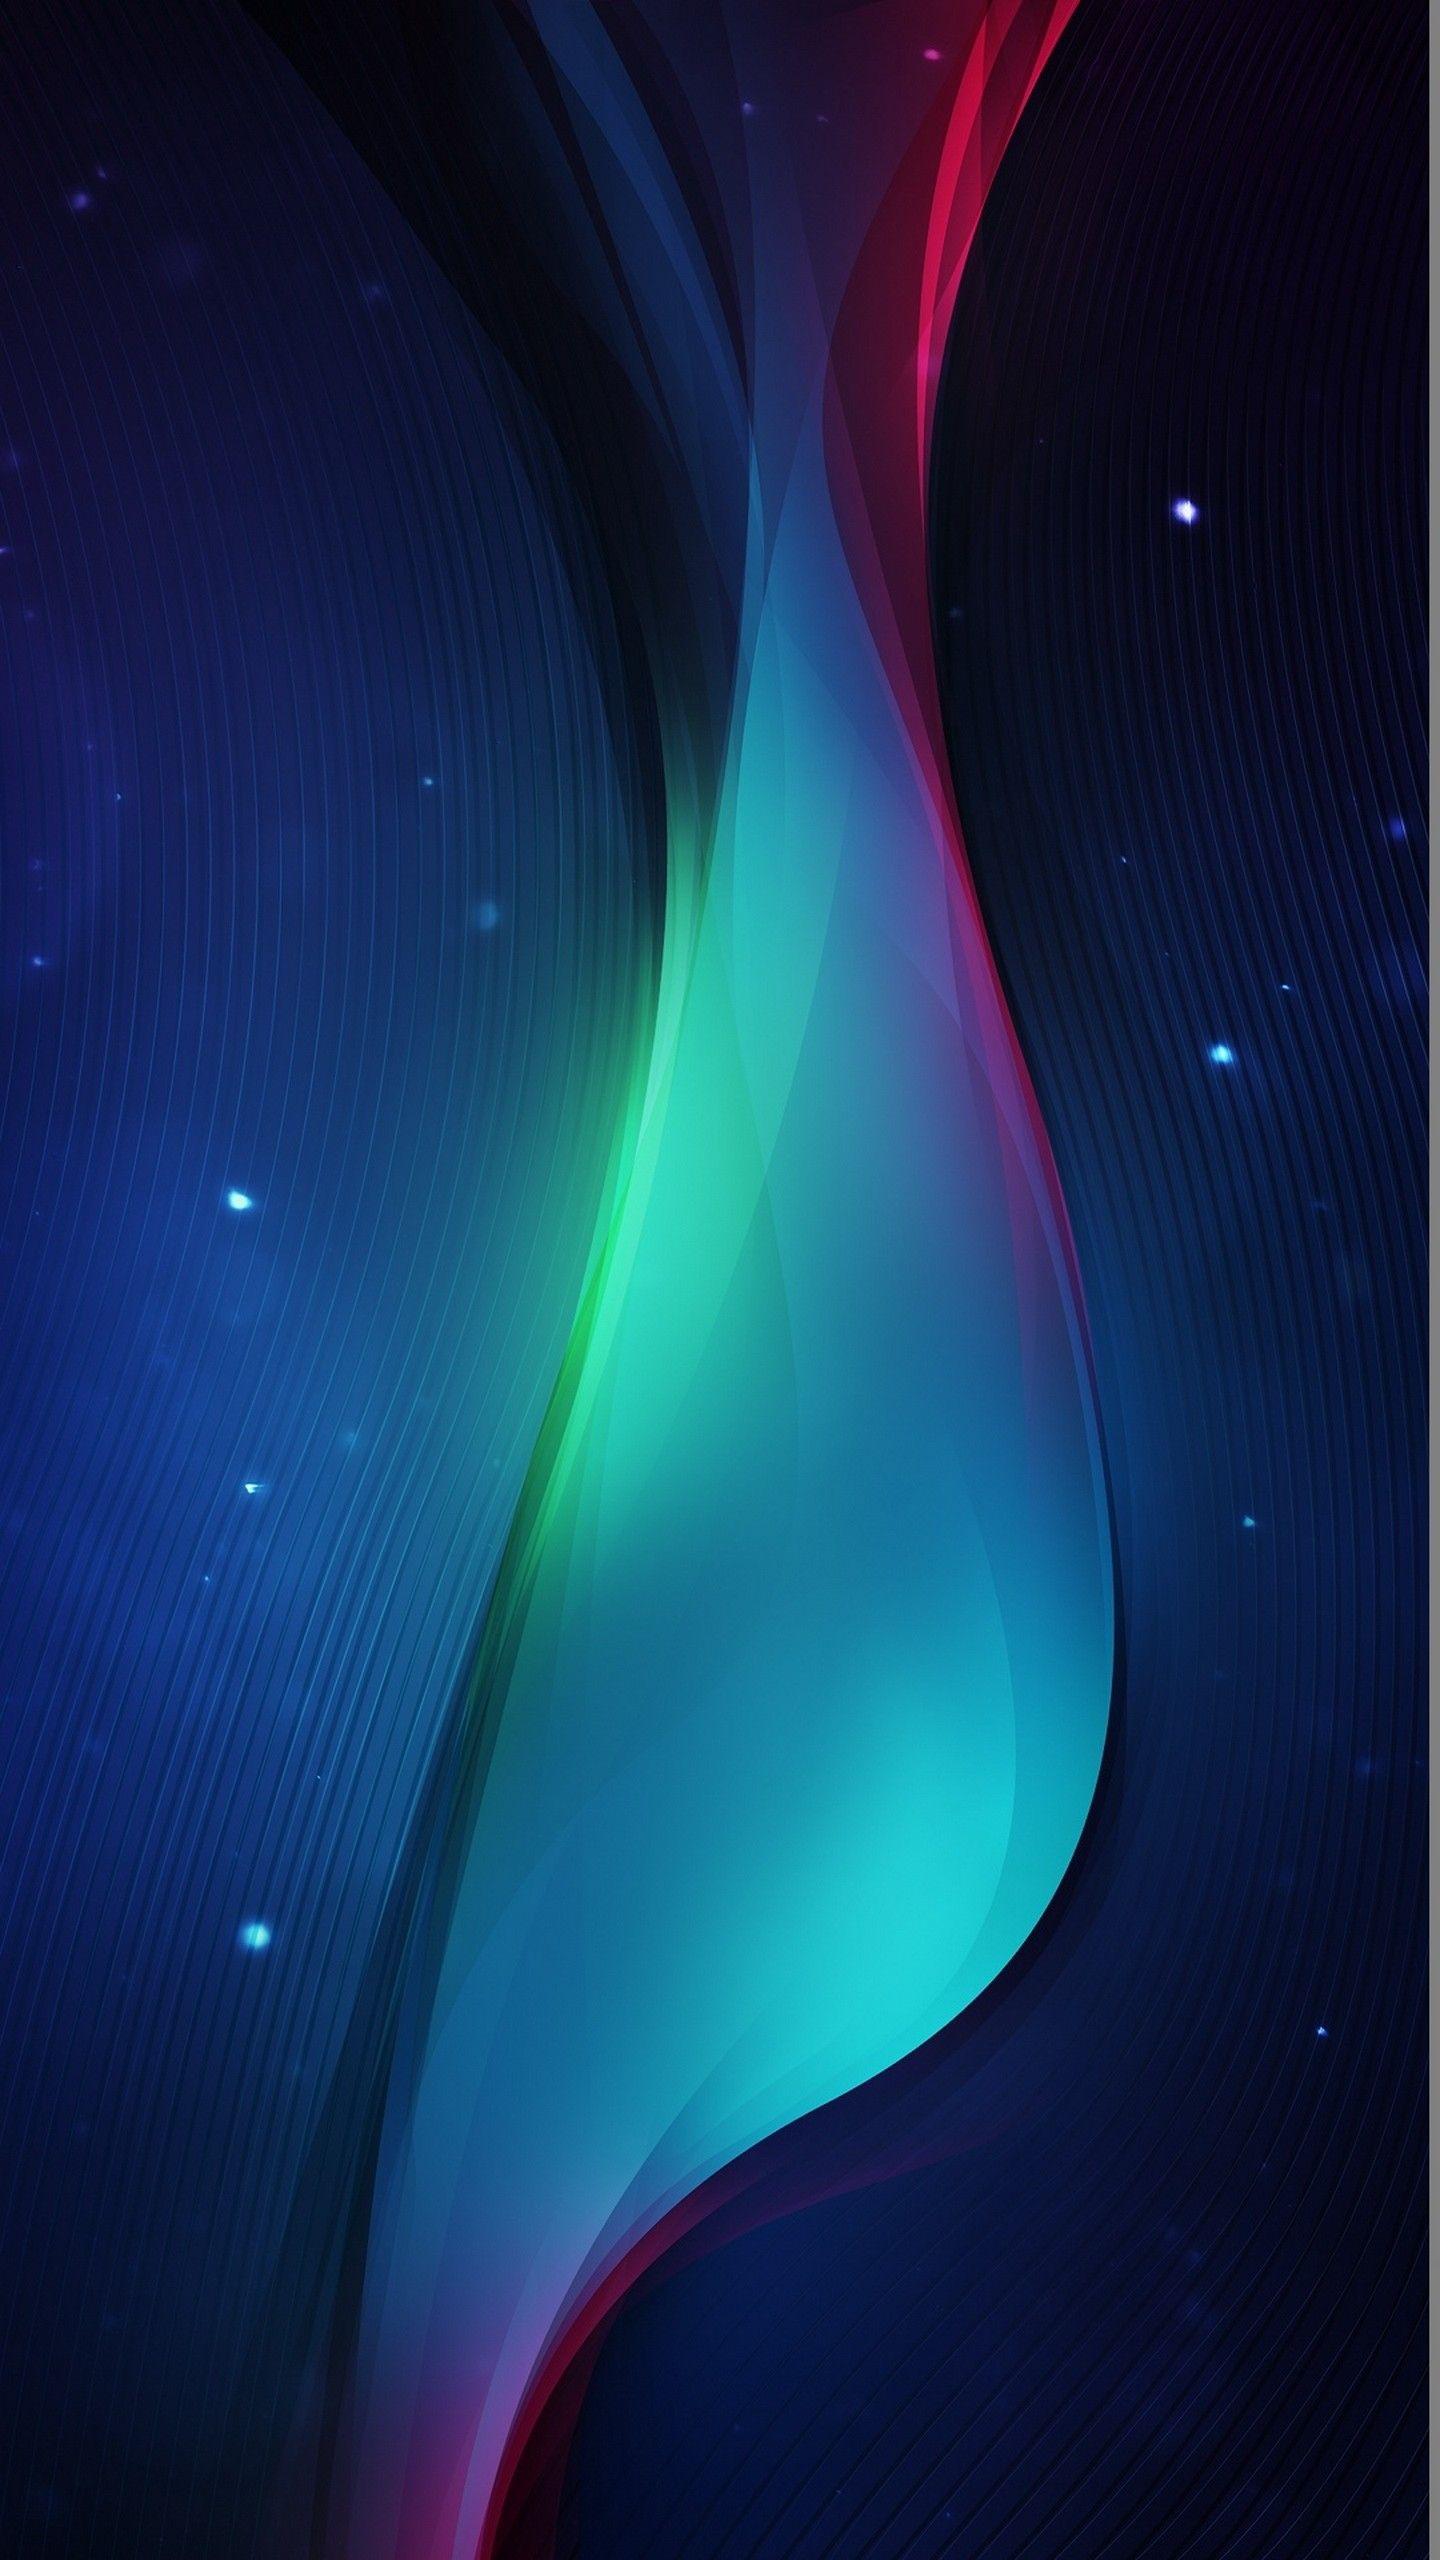 Samsung Galaxy S6 Wallpapers - Top Free